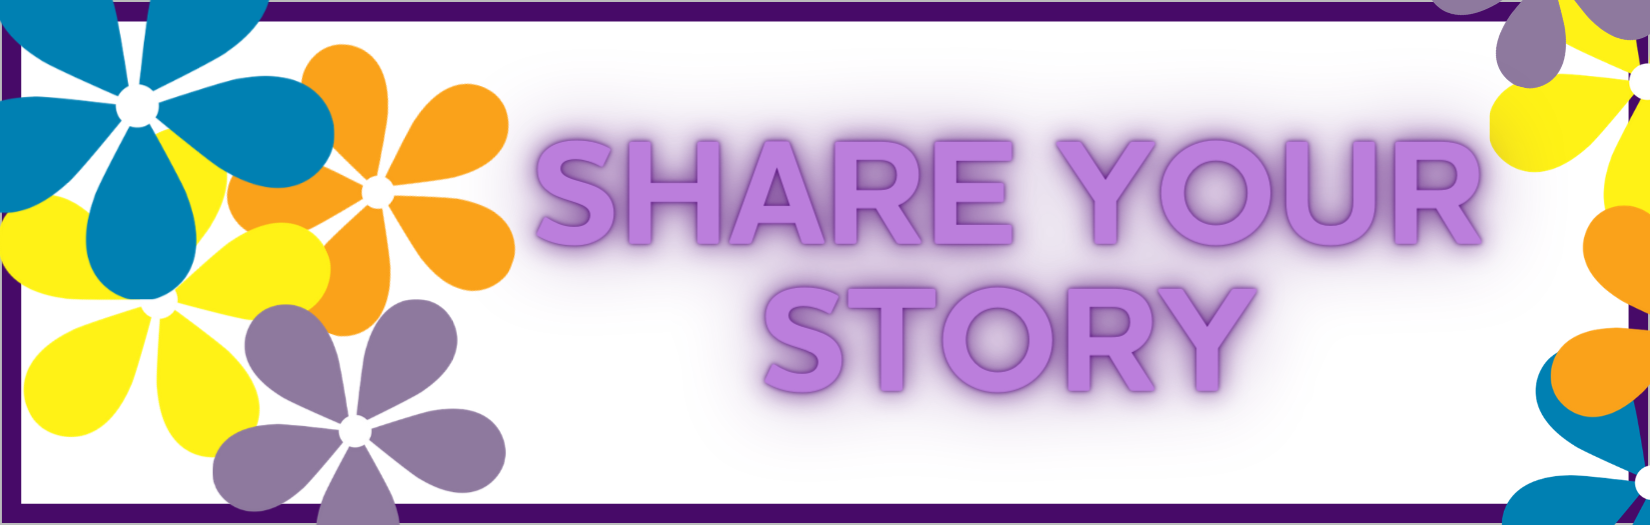 Share Your Story Button